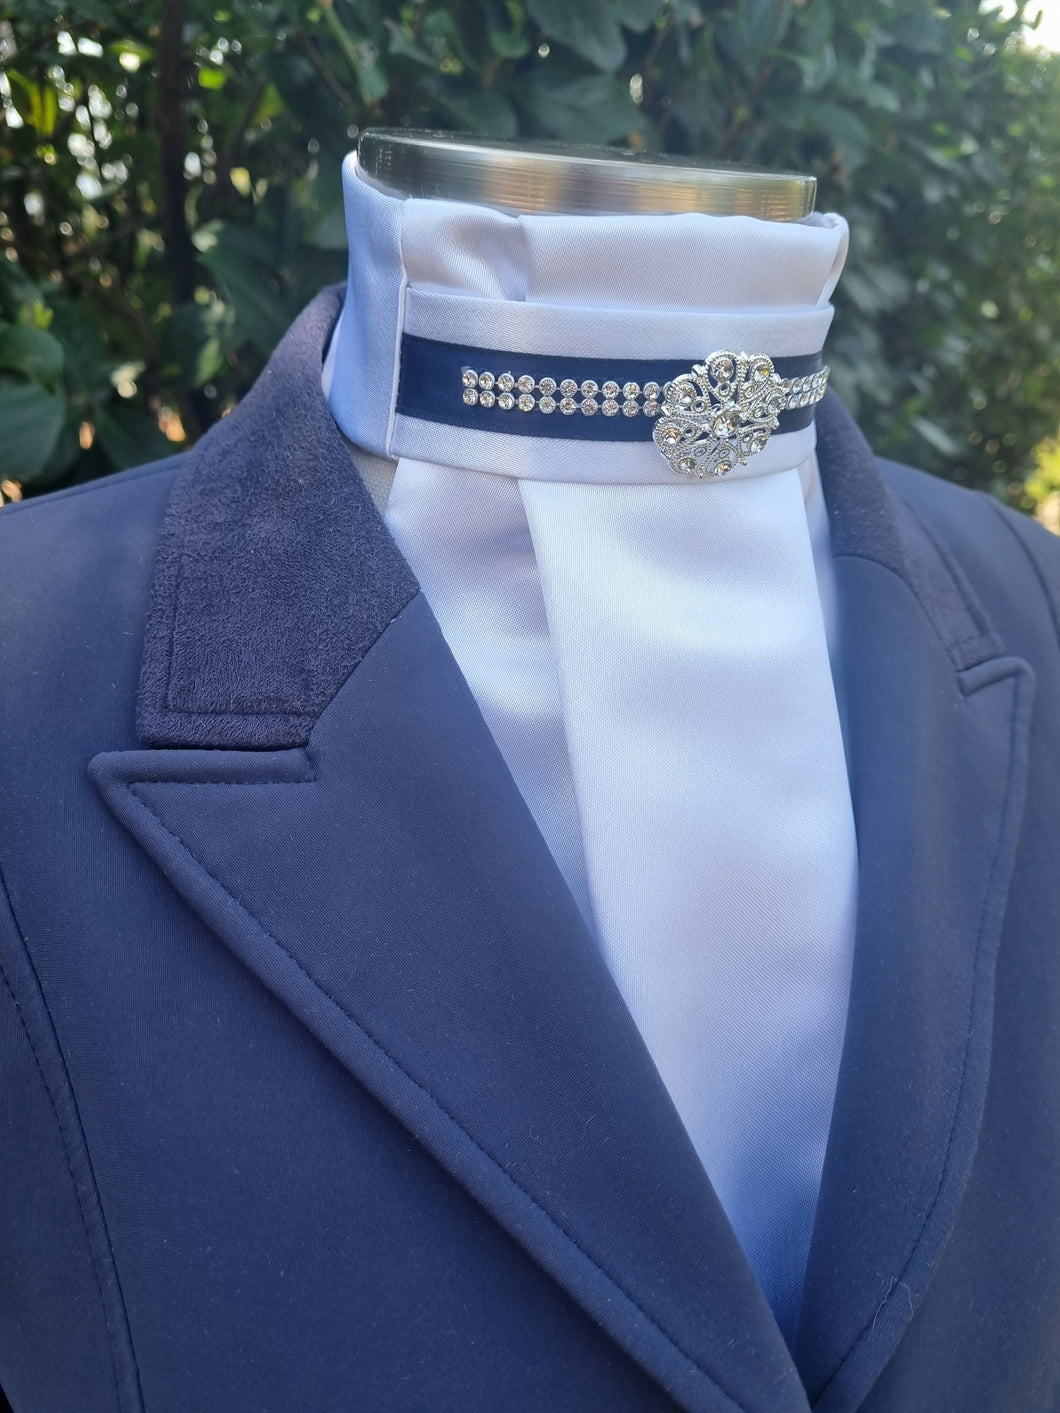 ERA EURO KARA Stock Tie - White pleated satin with navy & crystal trim and brooch